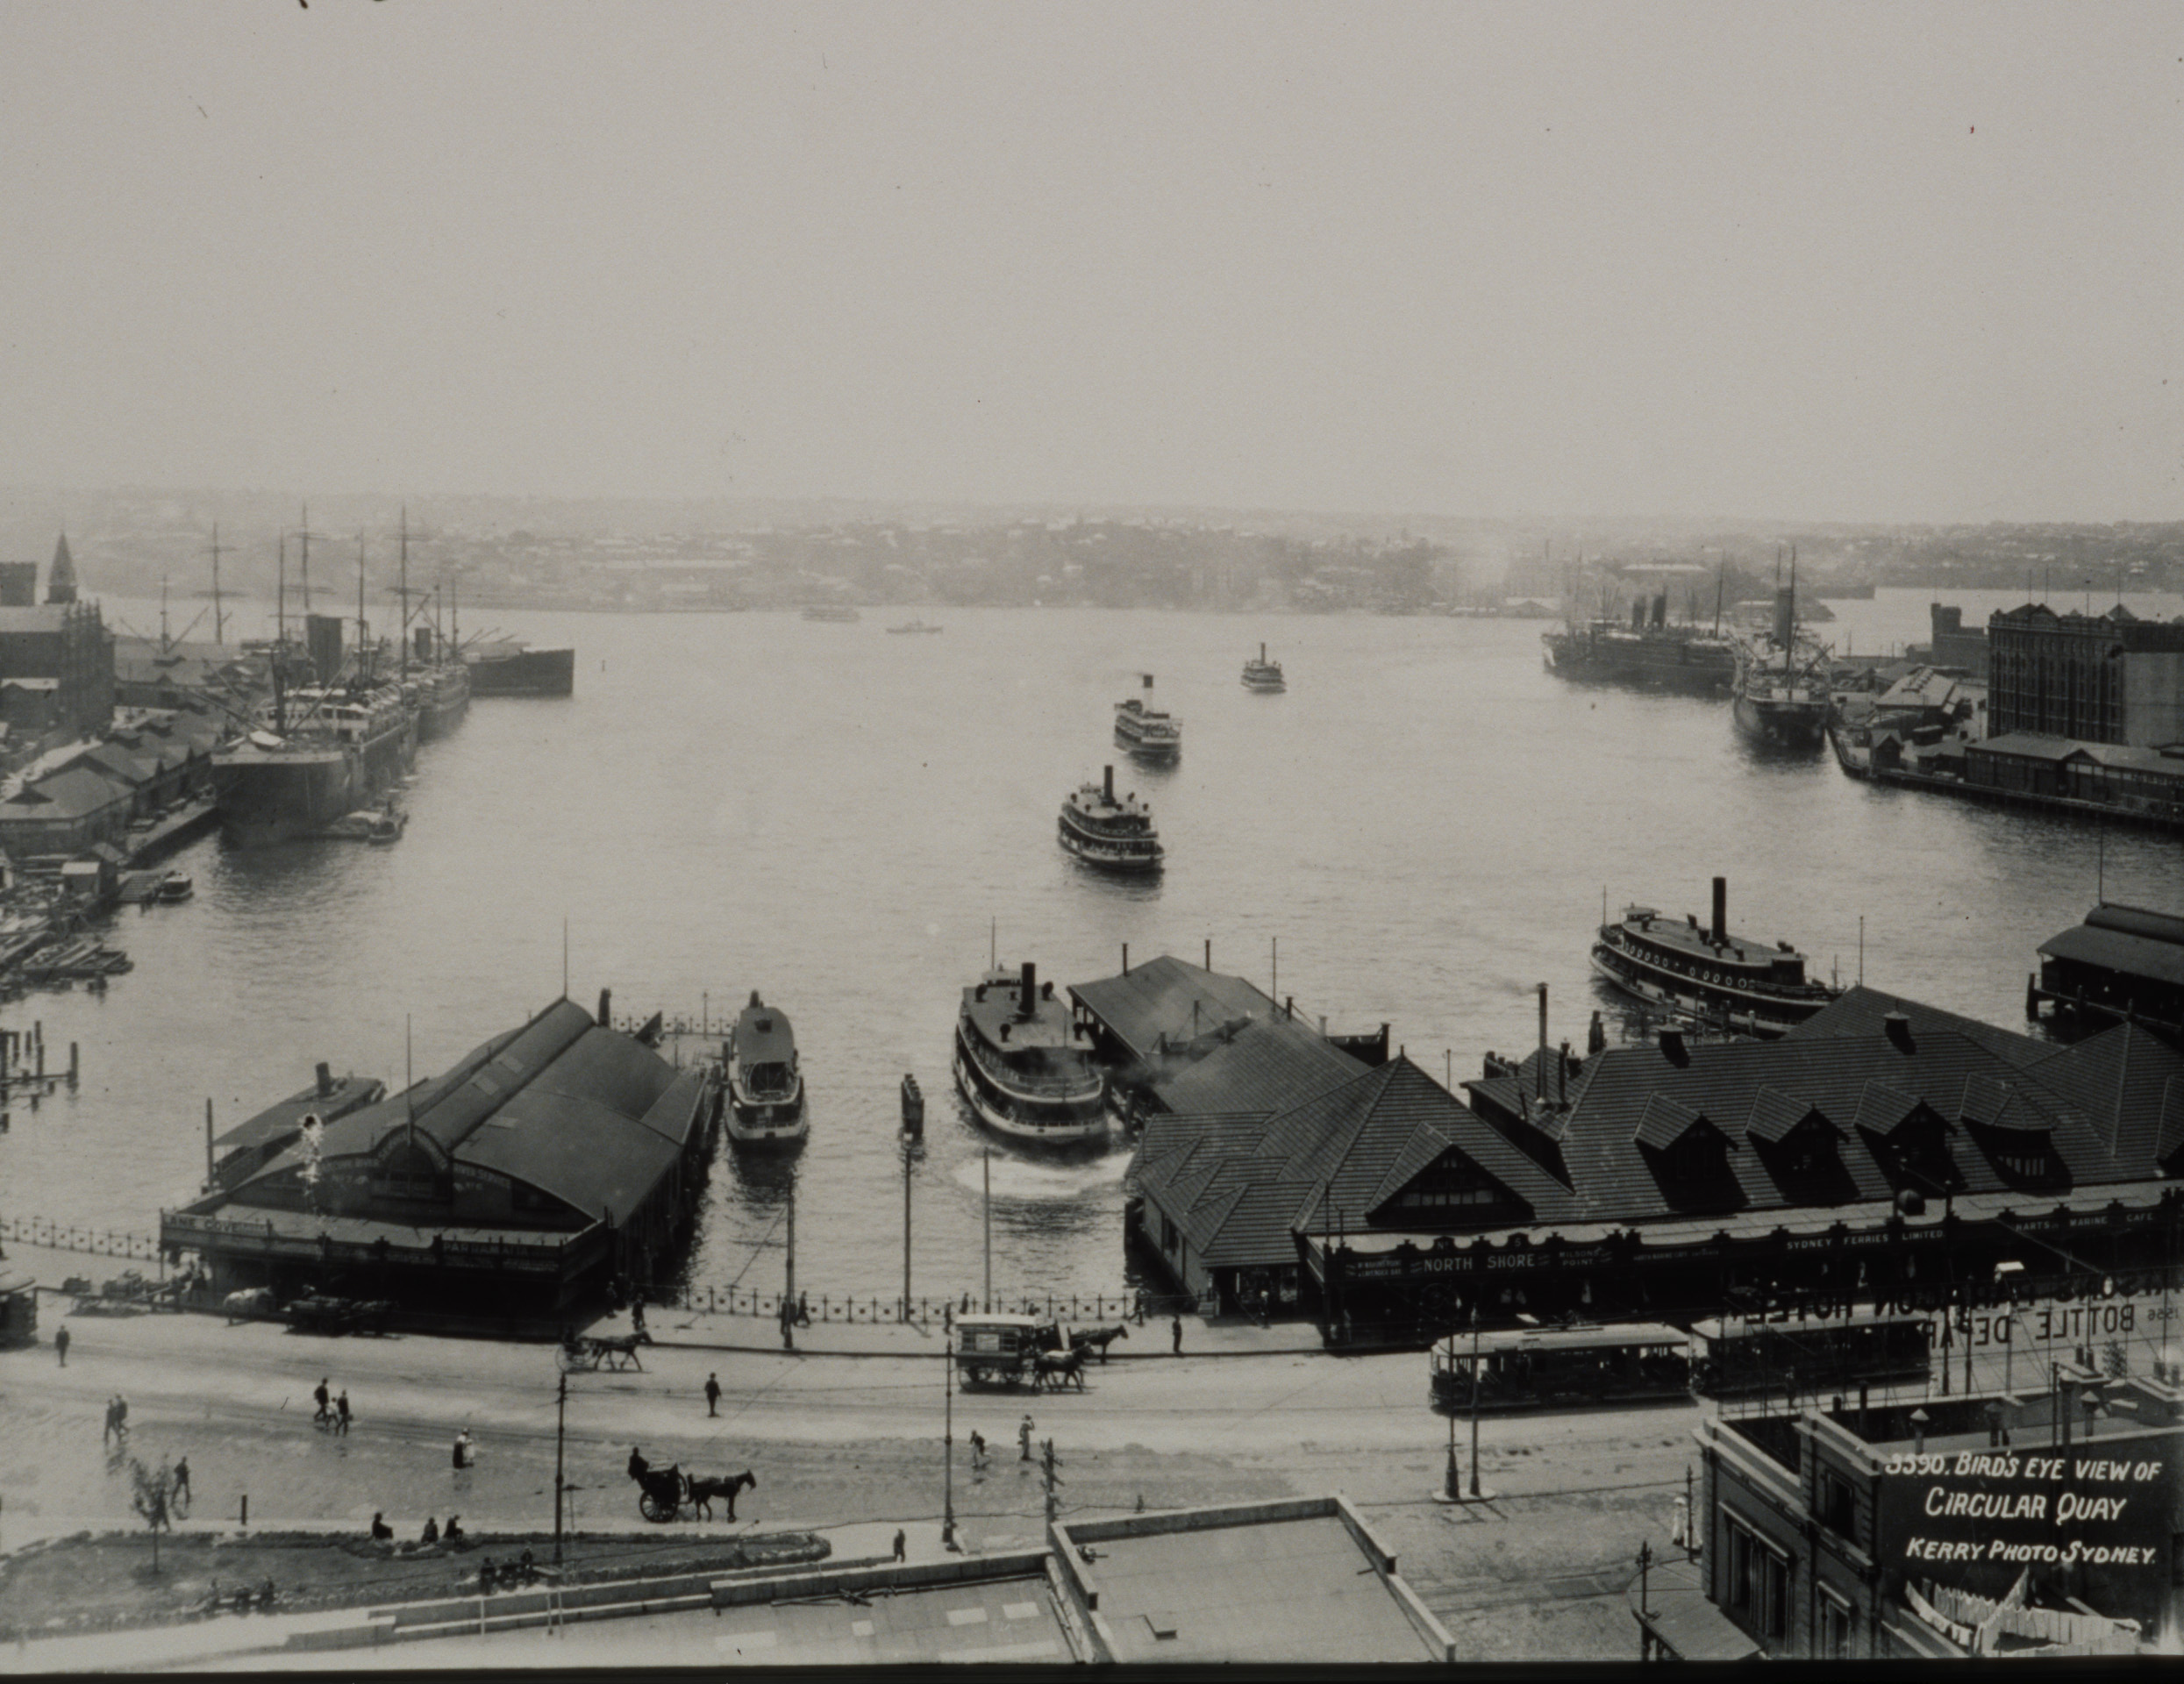 Glass negative of Sydney's Circular Quay showing ferries, ferry wharves, ocean liners, trams and hansom cabs, 1906-1910